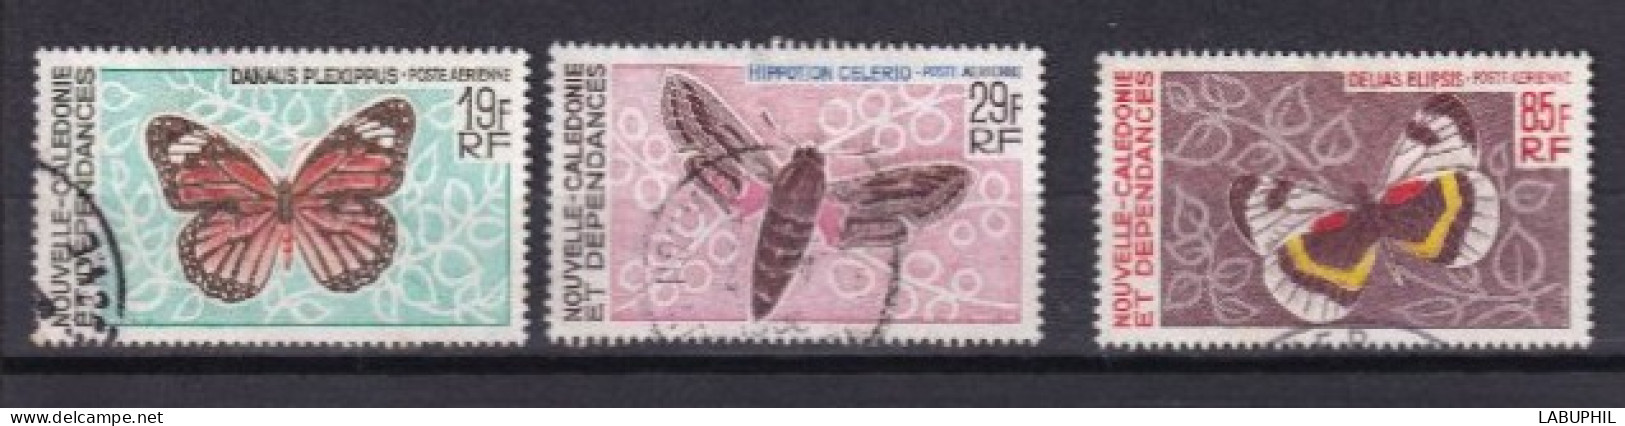 NOUVELLE CALEDONIE Dispersion D'une Collection Oblitéré Used  1967 Faune Papillons - Used Stamps